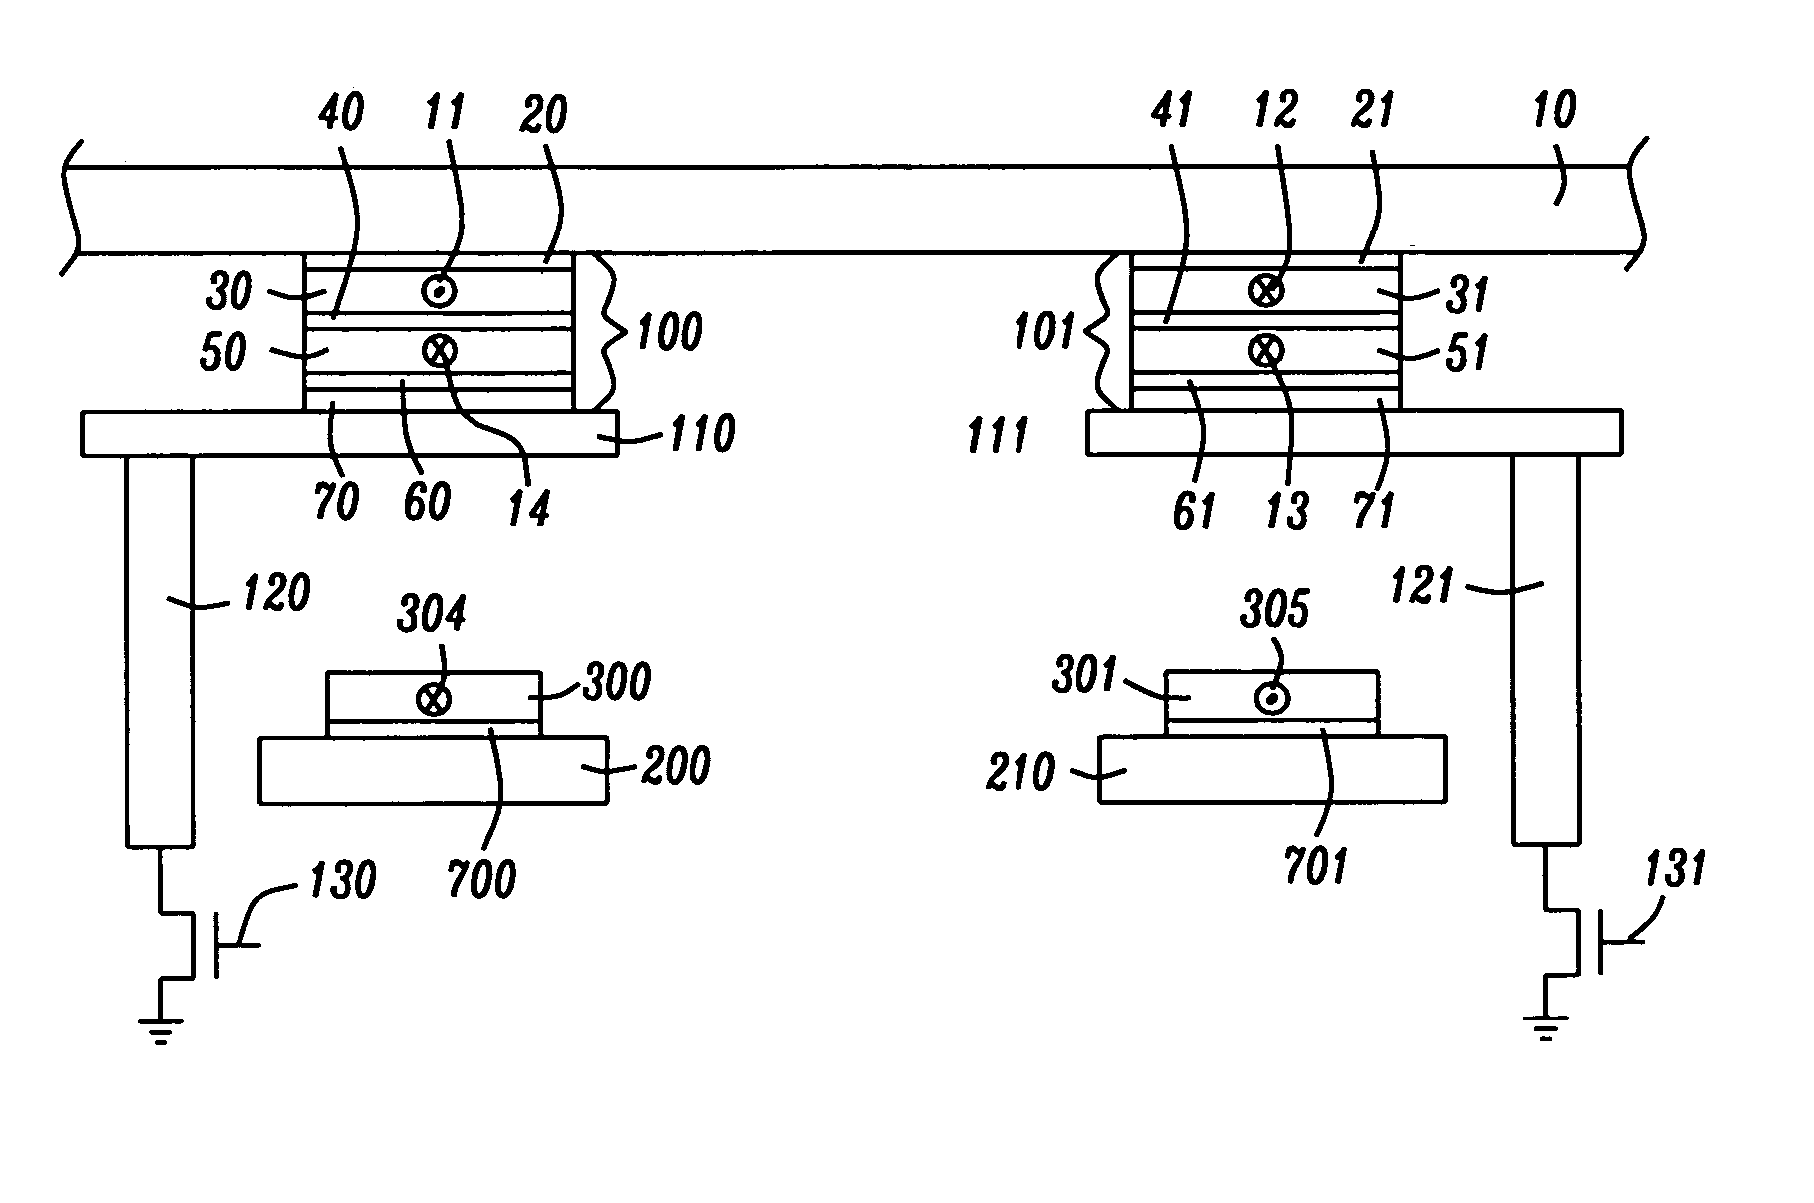 MRAM with split read-write cell structures